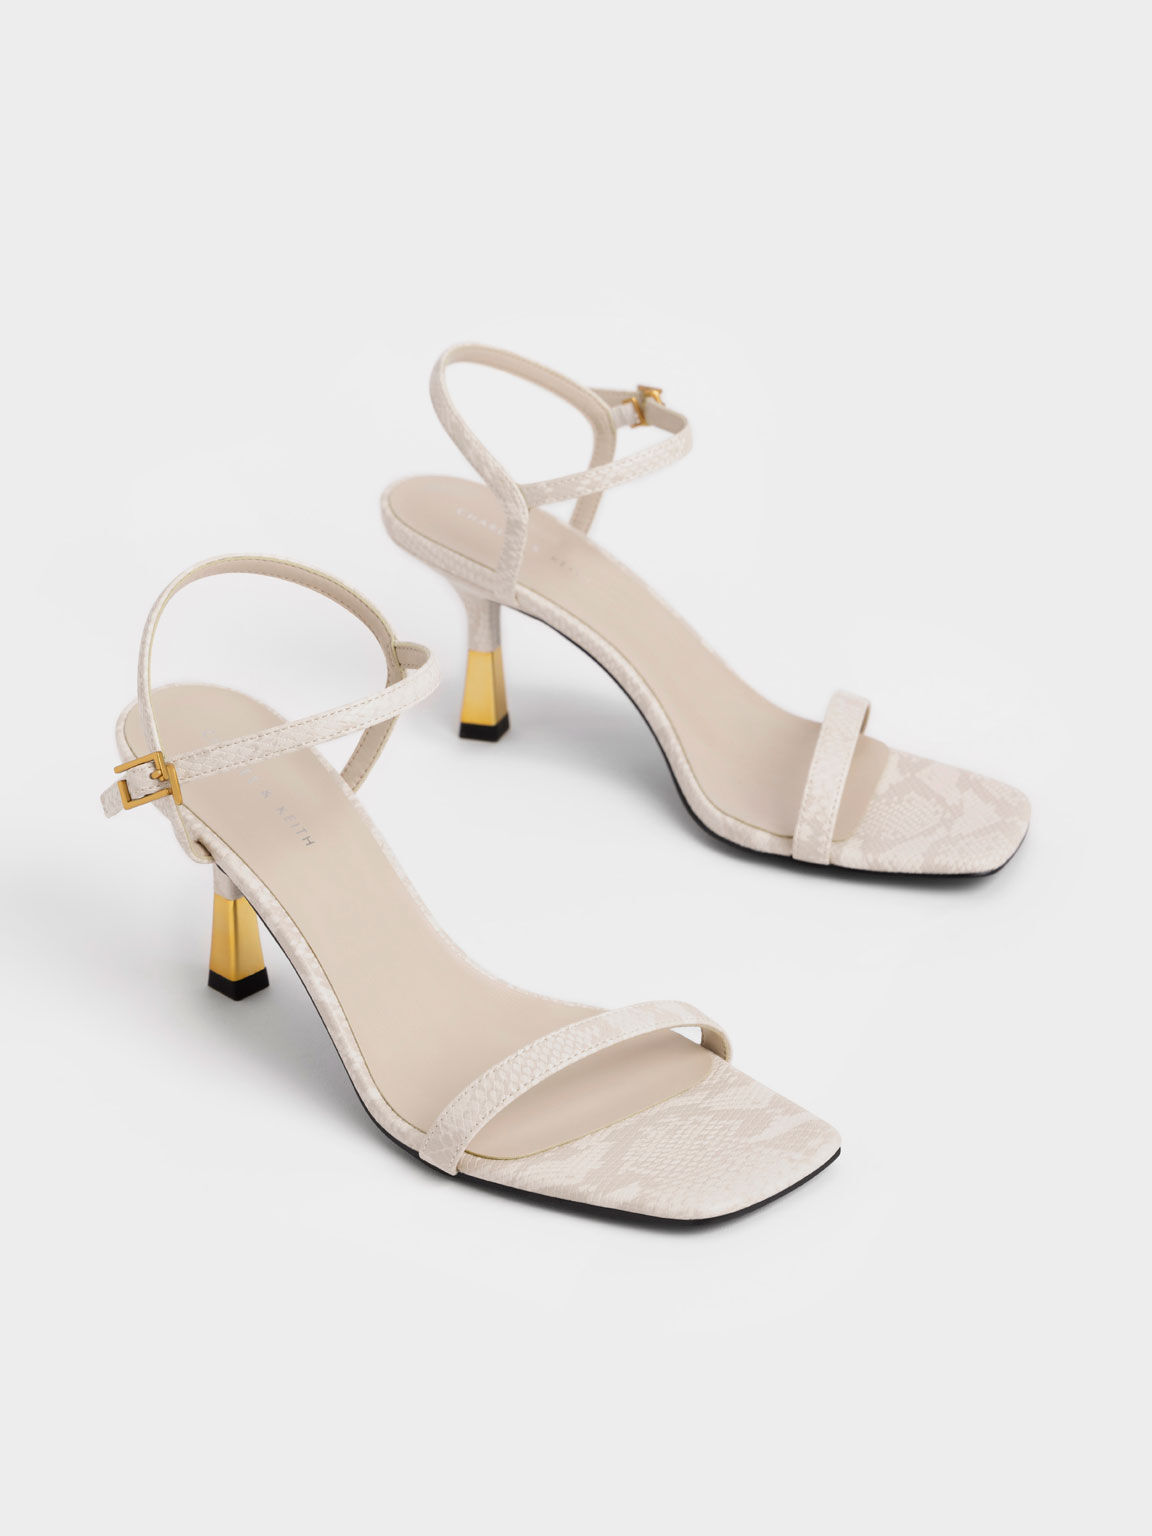 Strappy kitten heels are the It-Shoes of 2019! - ABOUT JEY